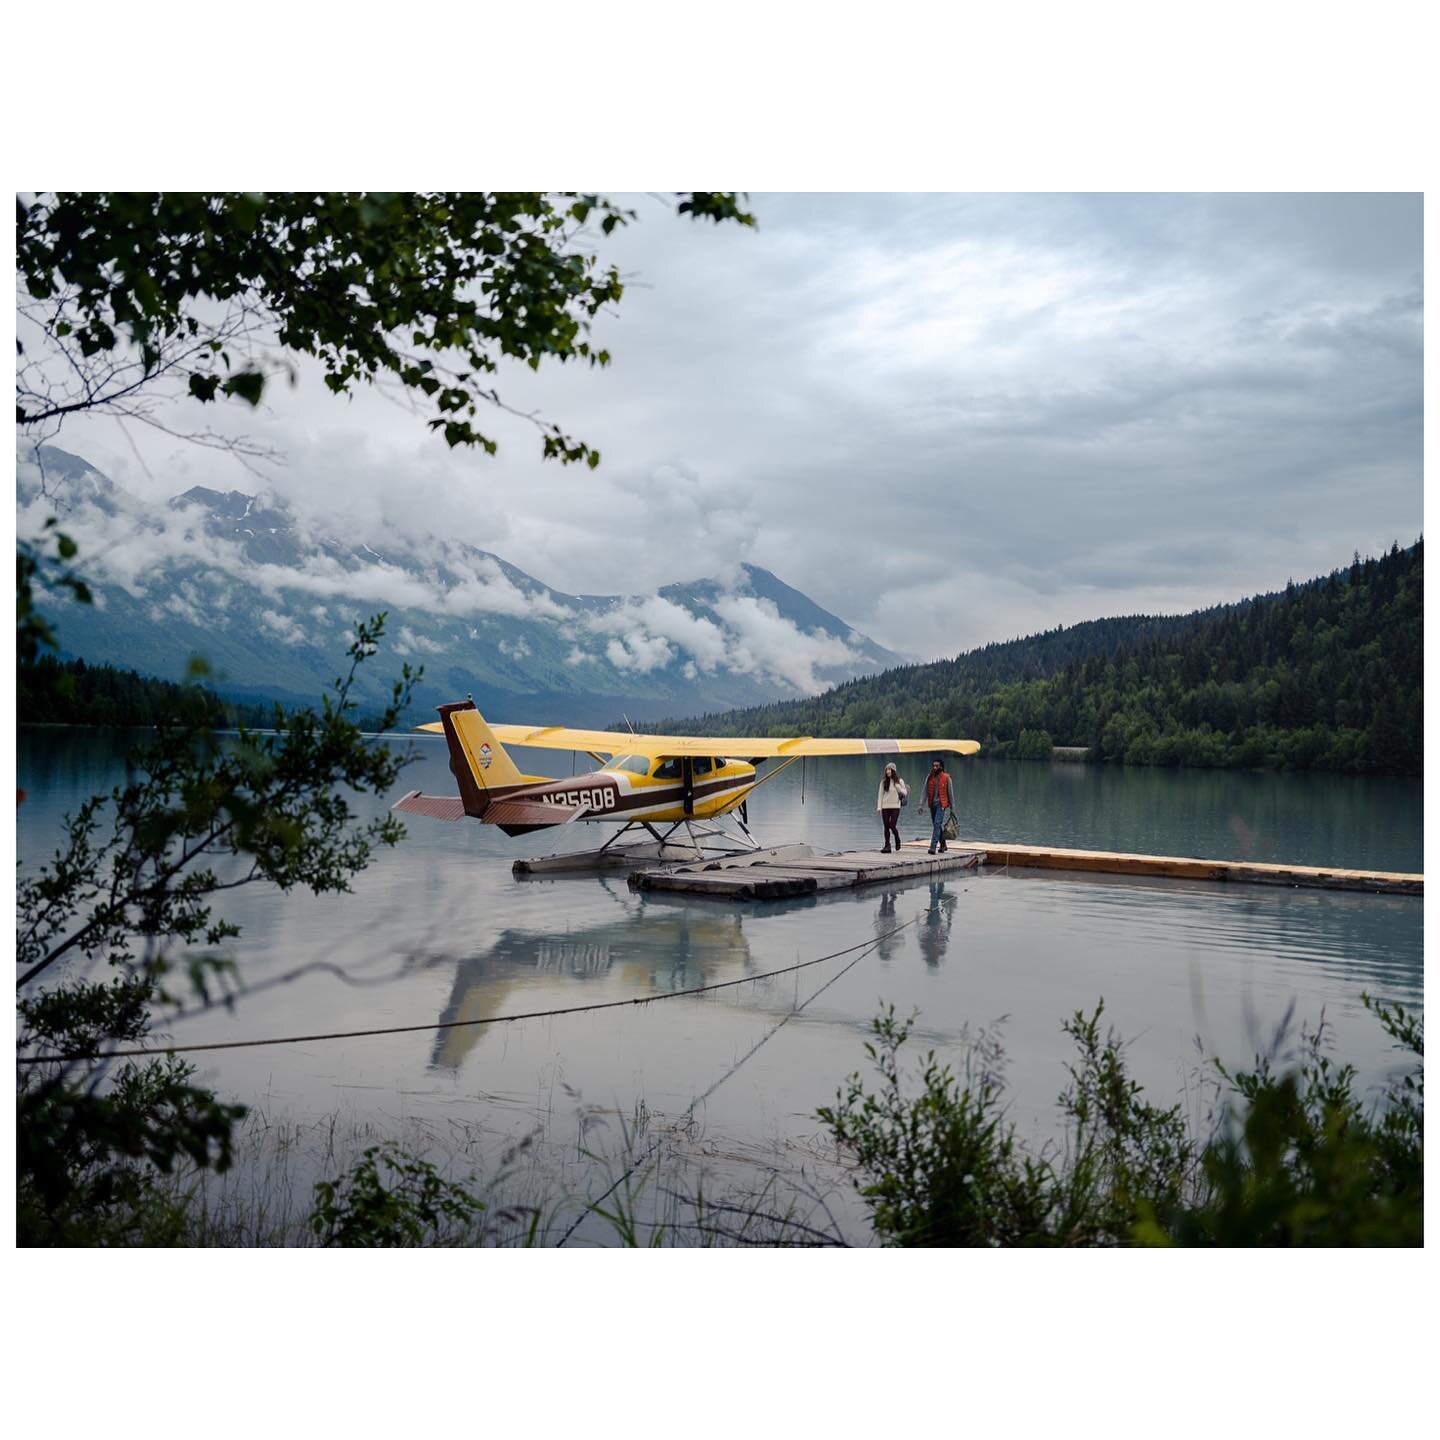 Here&rsquo;s to more adventures so remote you can only get there by floatplane. #alaska #adventure #outdoors